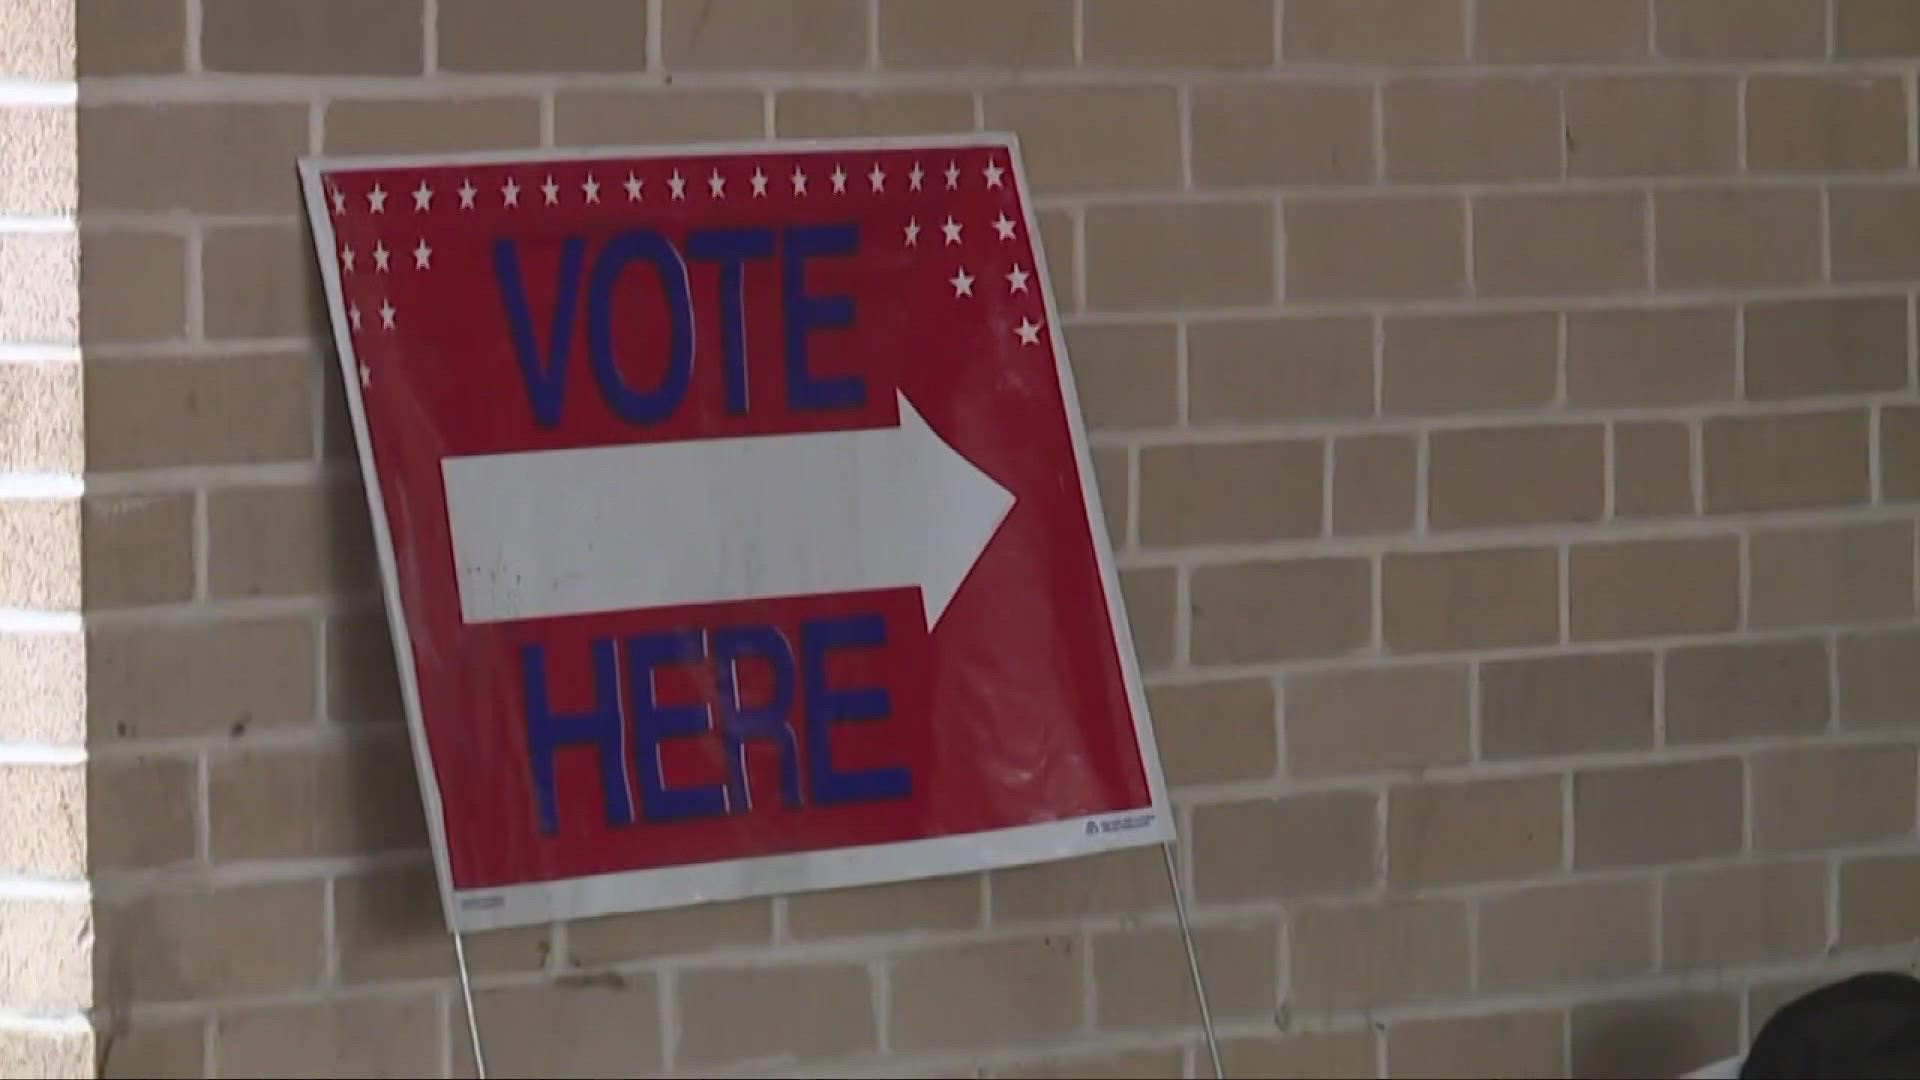 3News' Lynna Lai takes a closer look at some of the biggest races and issues on the November 8 election ballot.